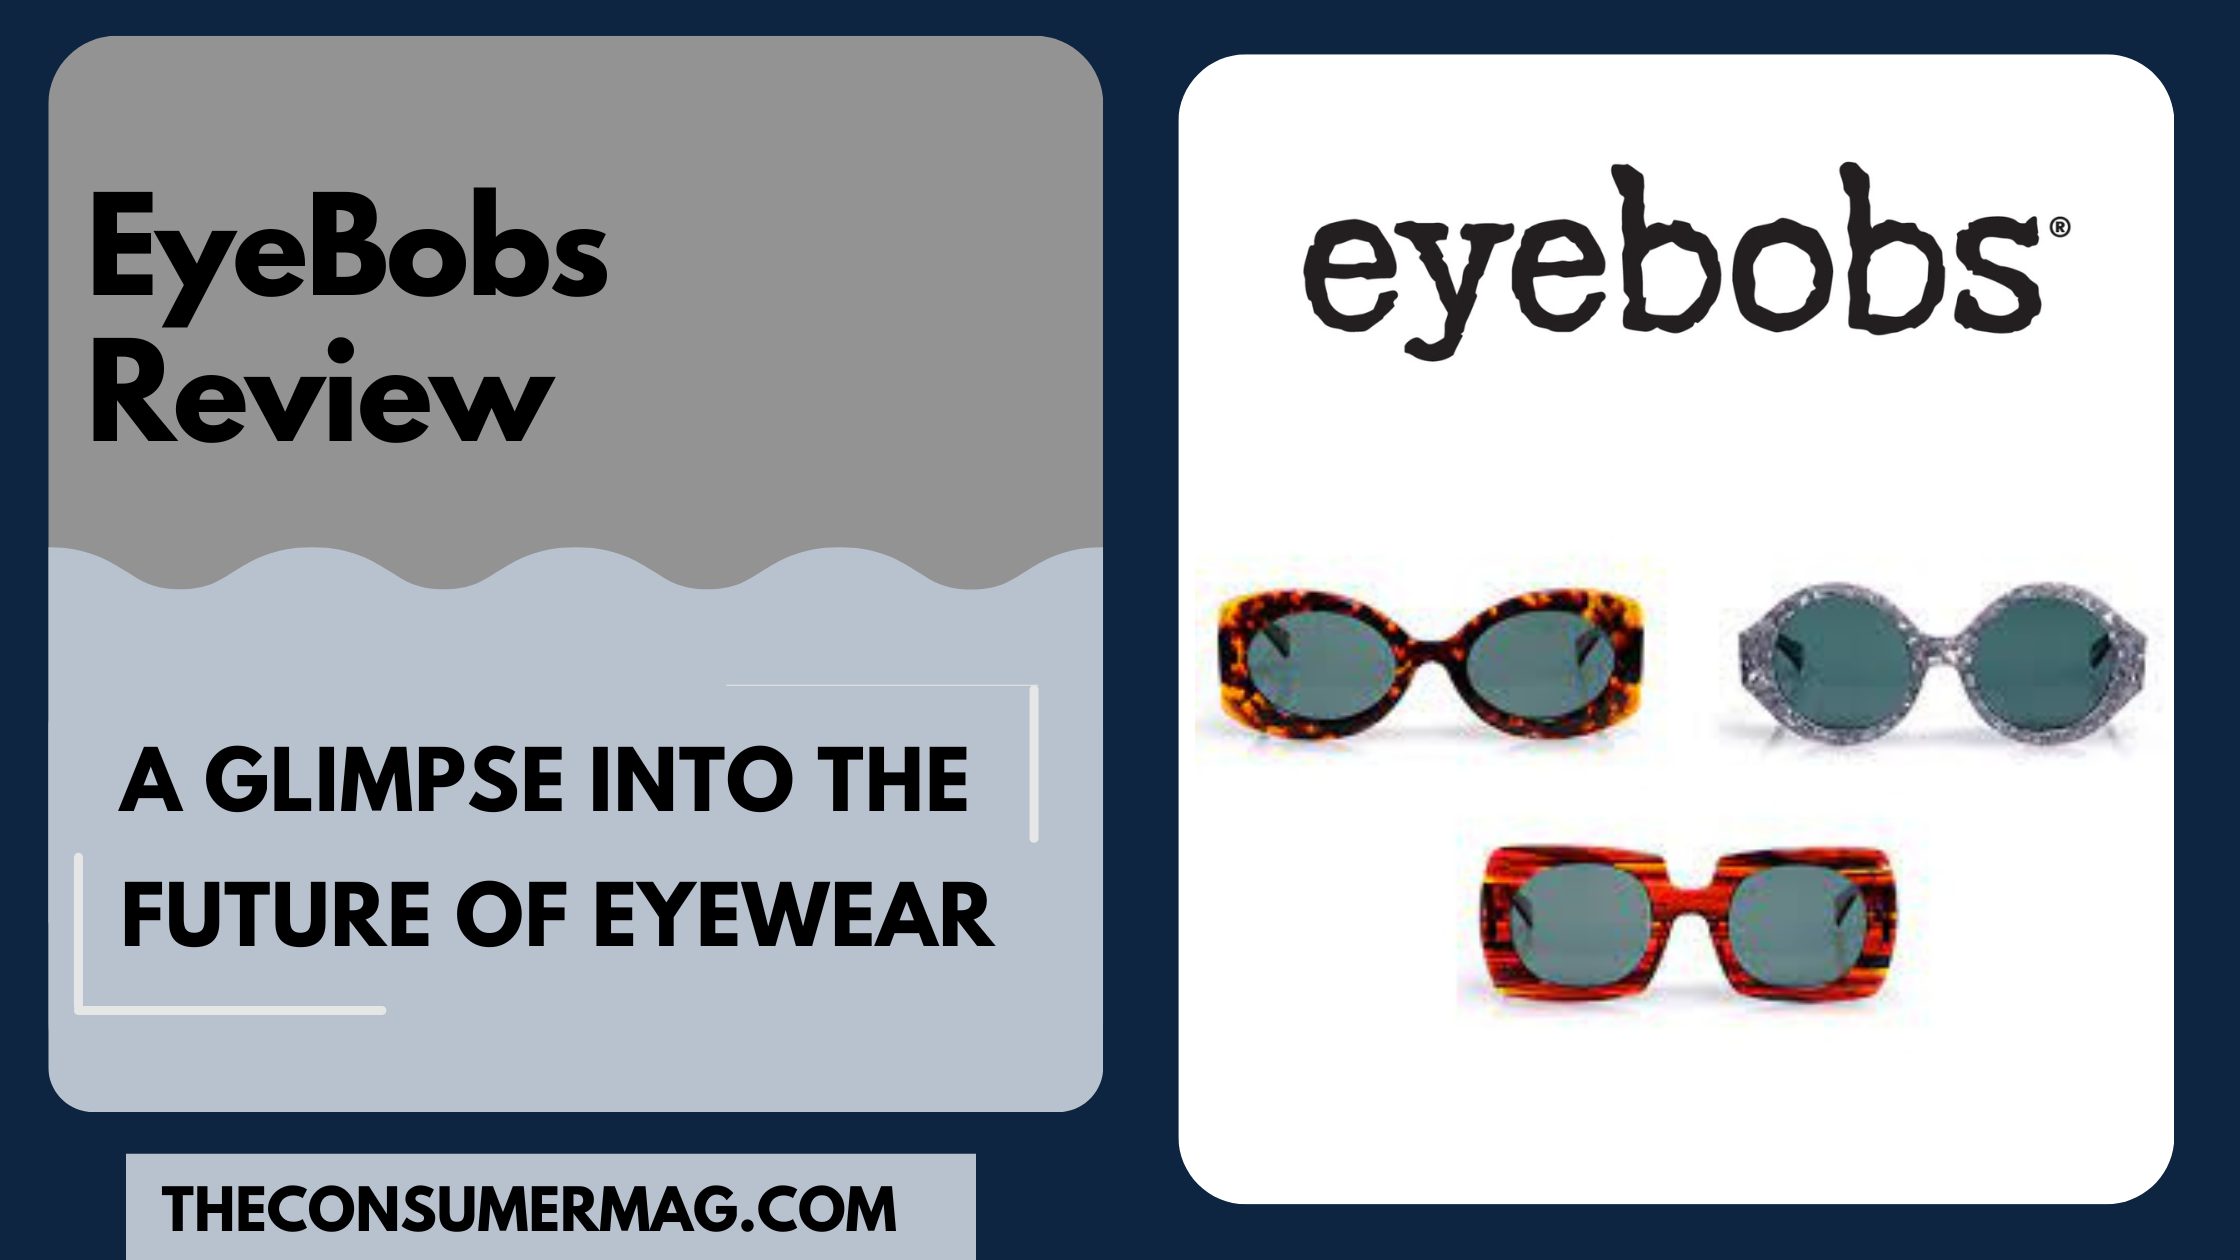 EyeBobs Review- A Glimpse Into The Future of Eyewear